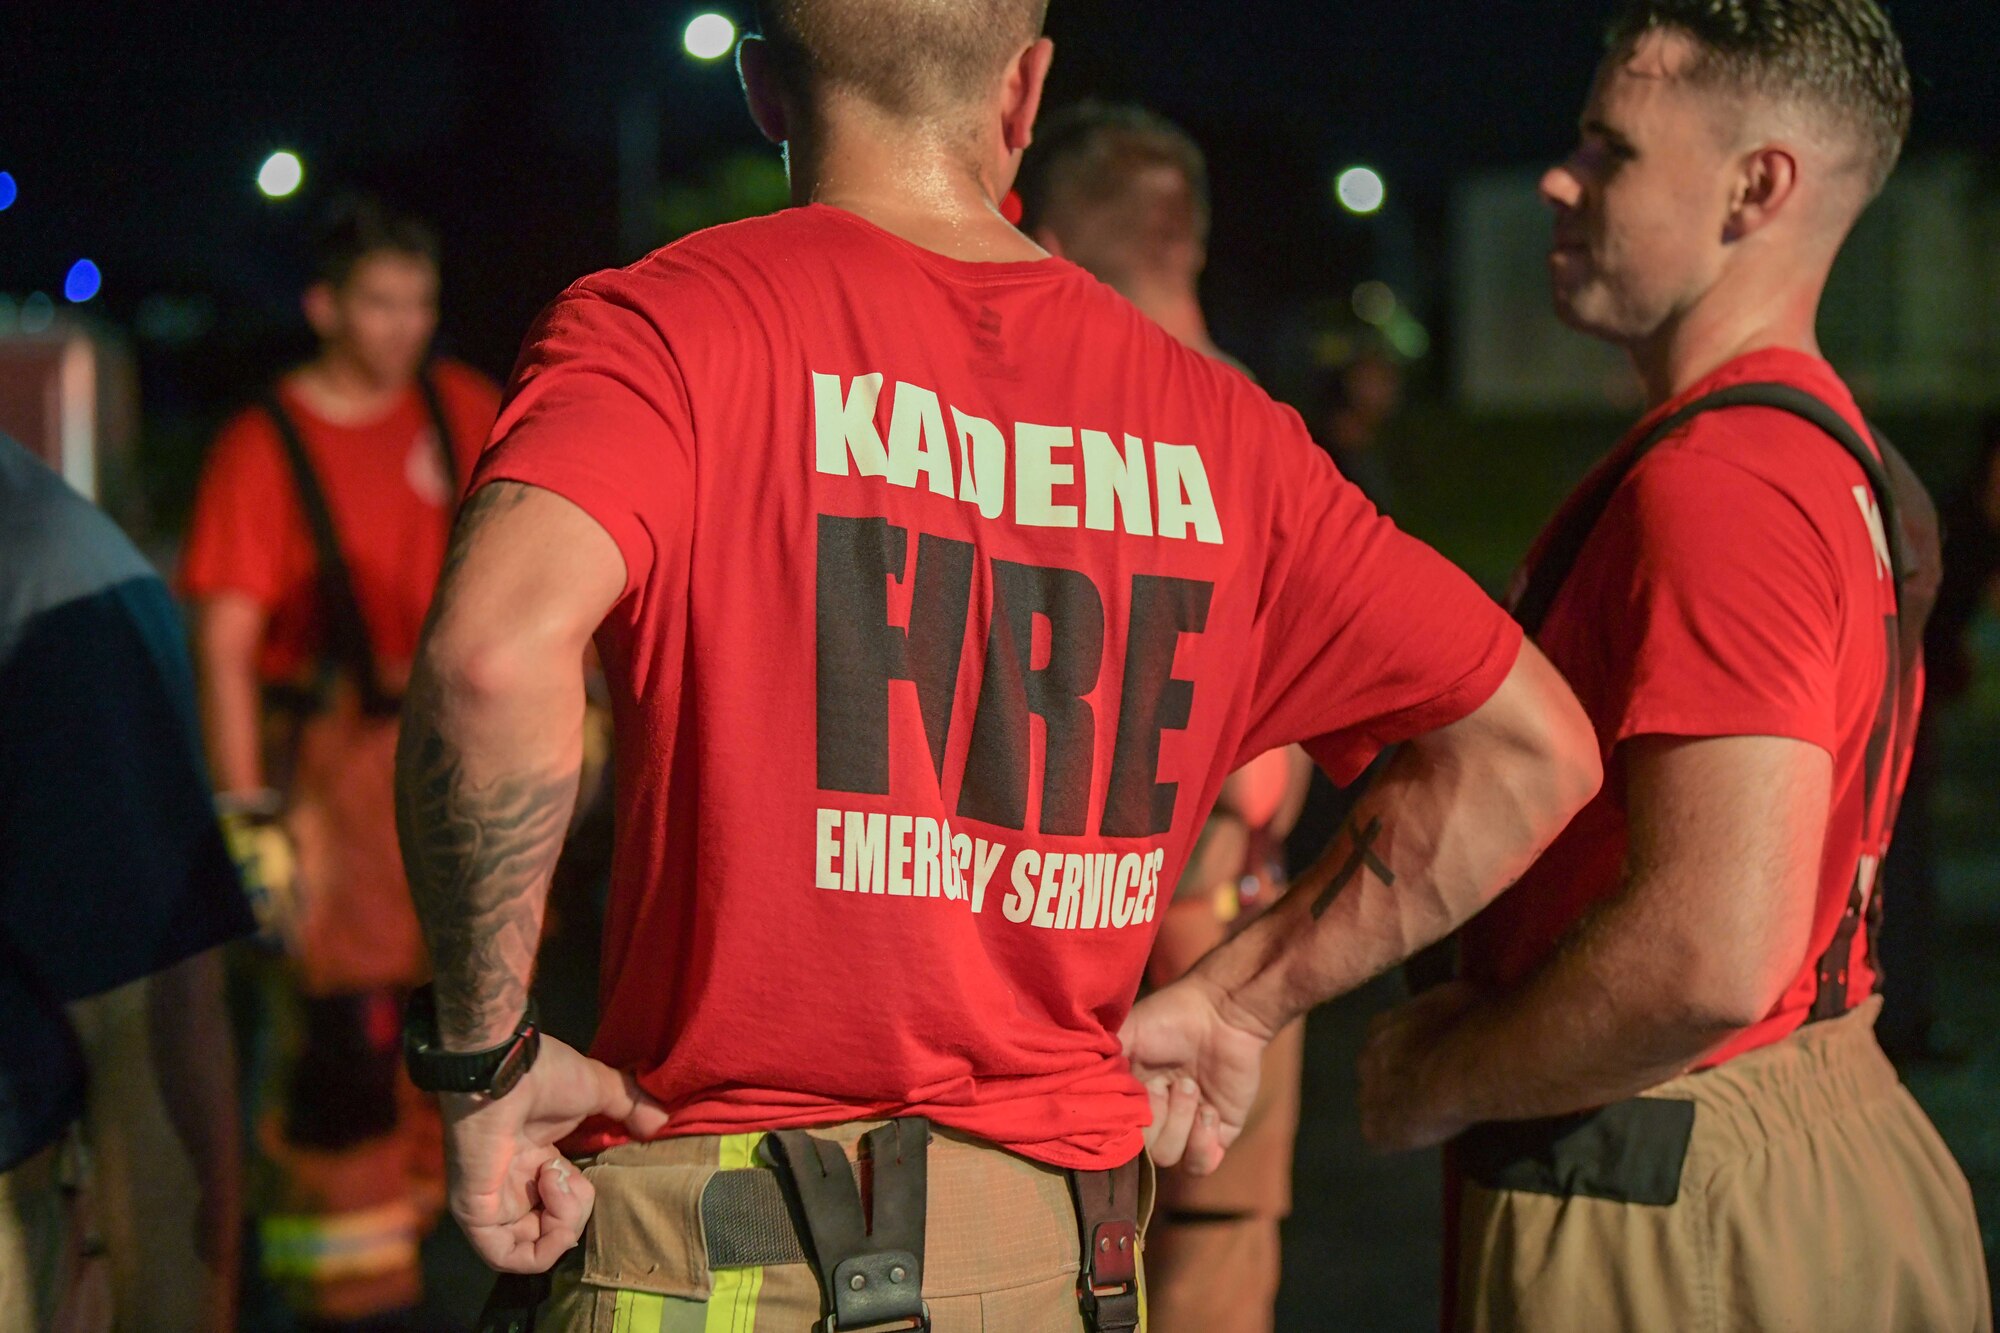 Firefighter shows his t-shirt logo.